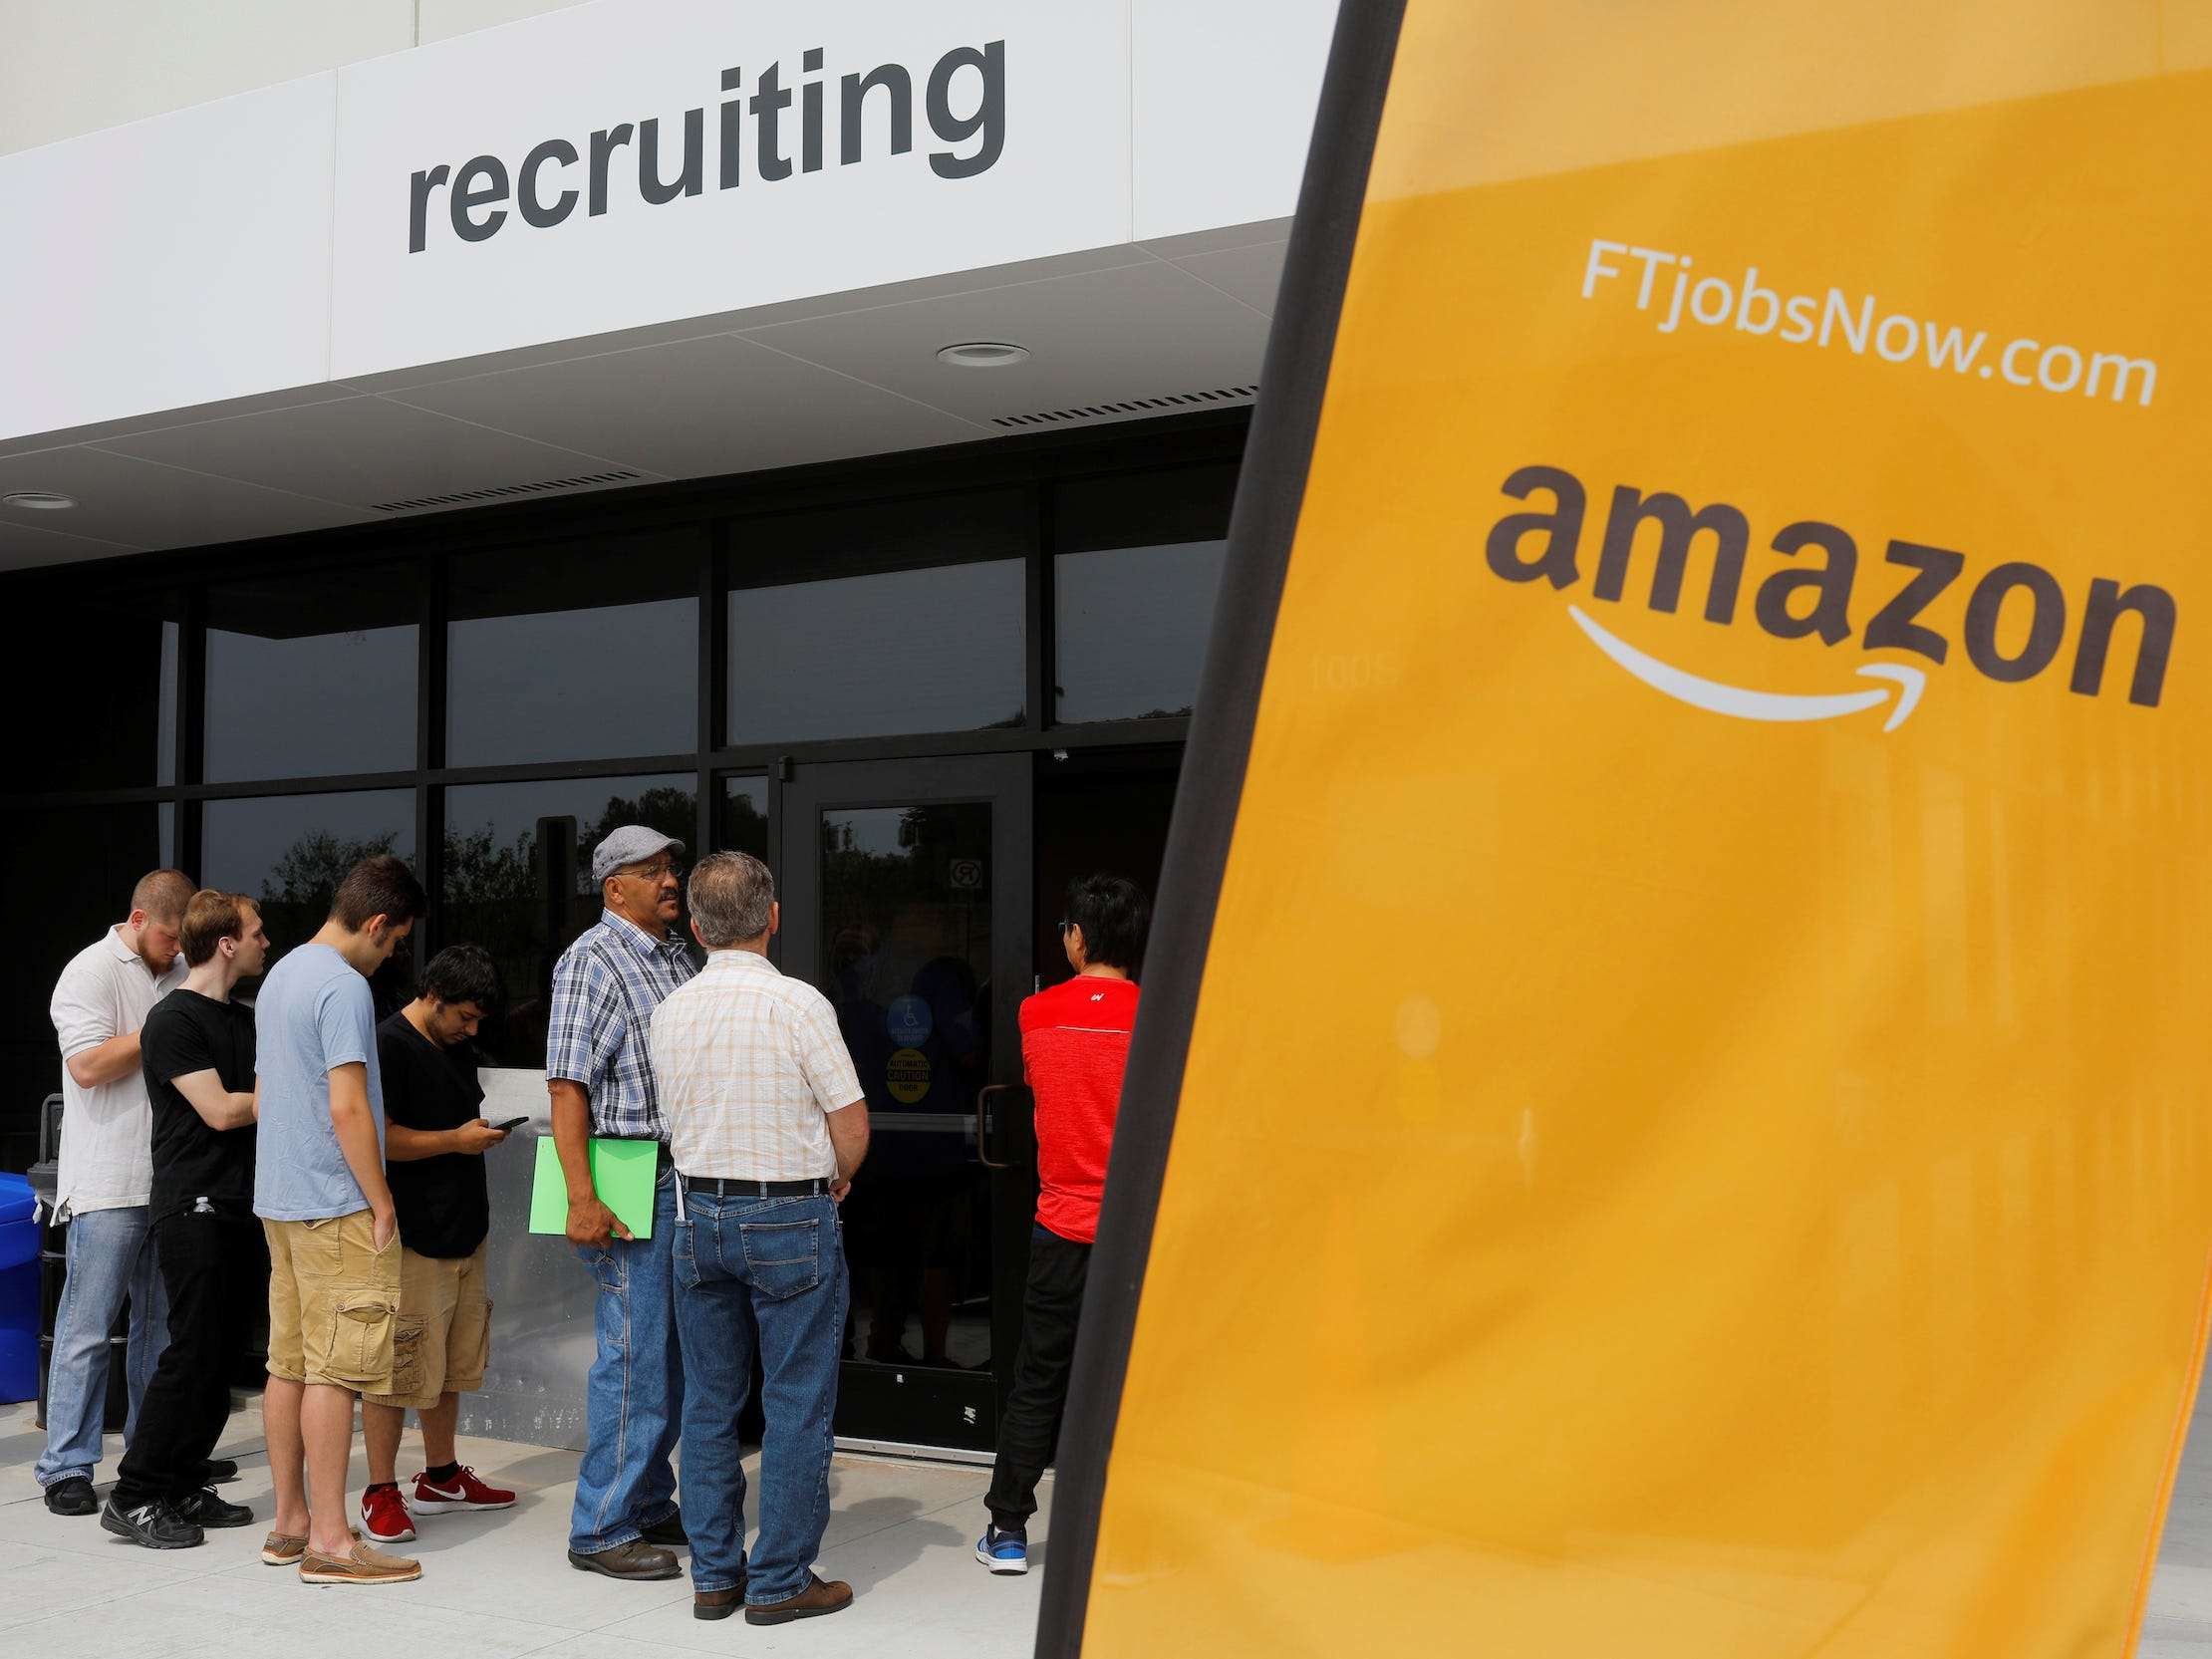 Insiders reveal what it's really like working at Amazon when it comes